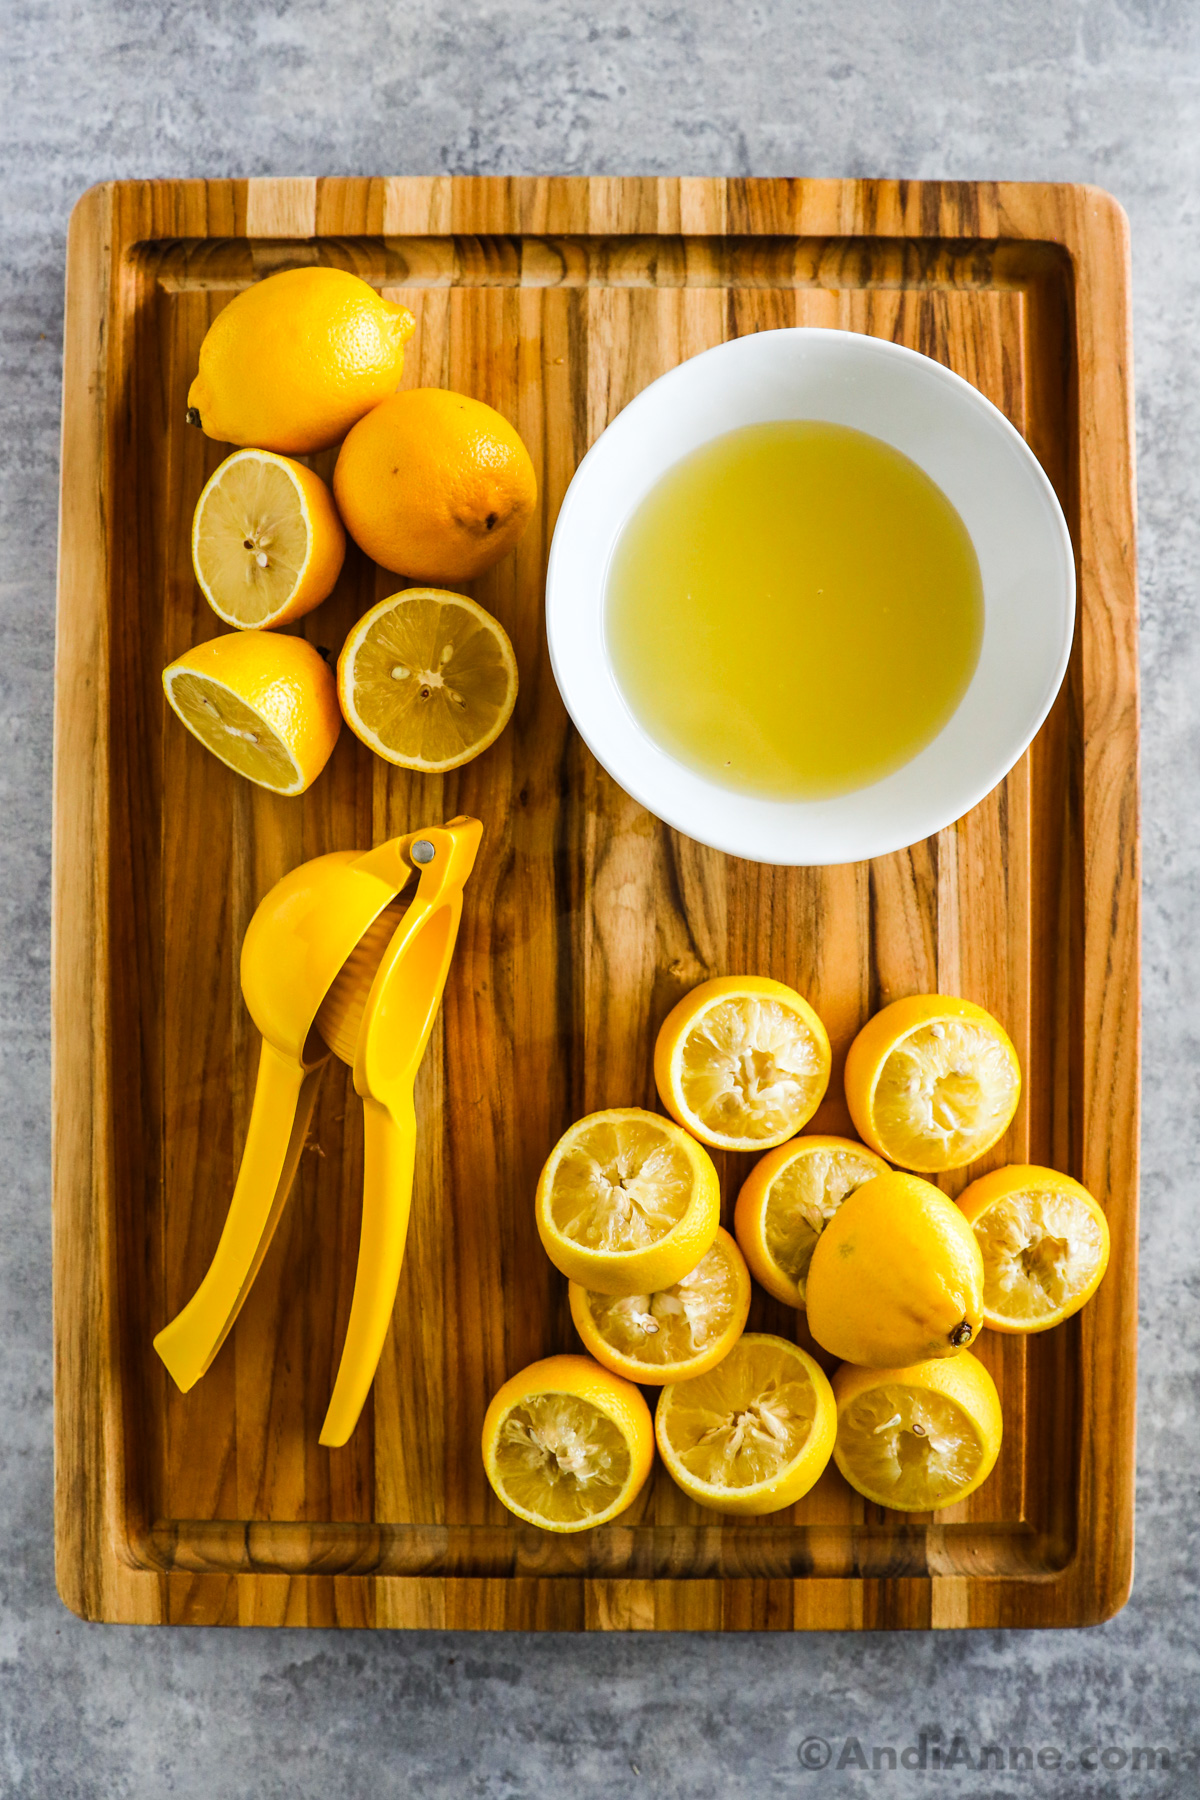 A bowl of lemon juice, sliced lemons and a yellow hand-held juicer sit on a wooden cutting board.